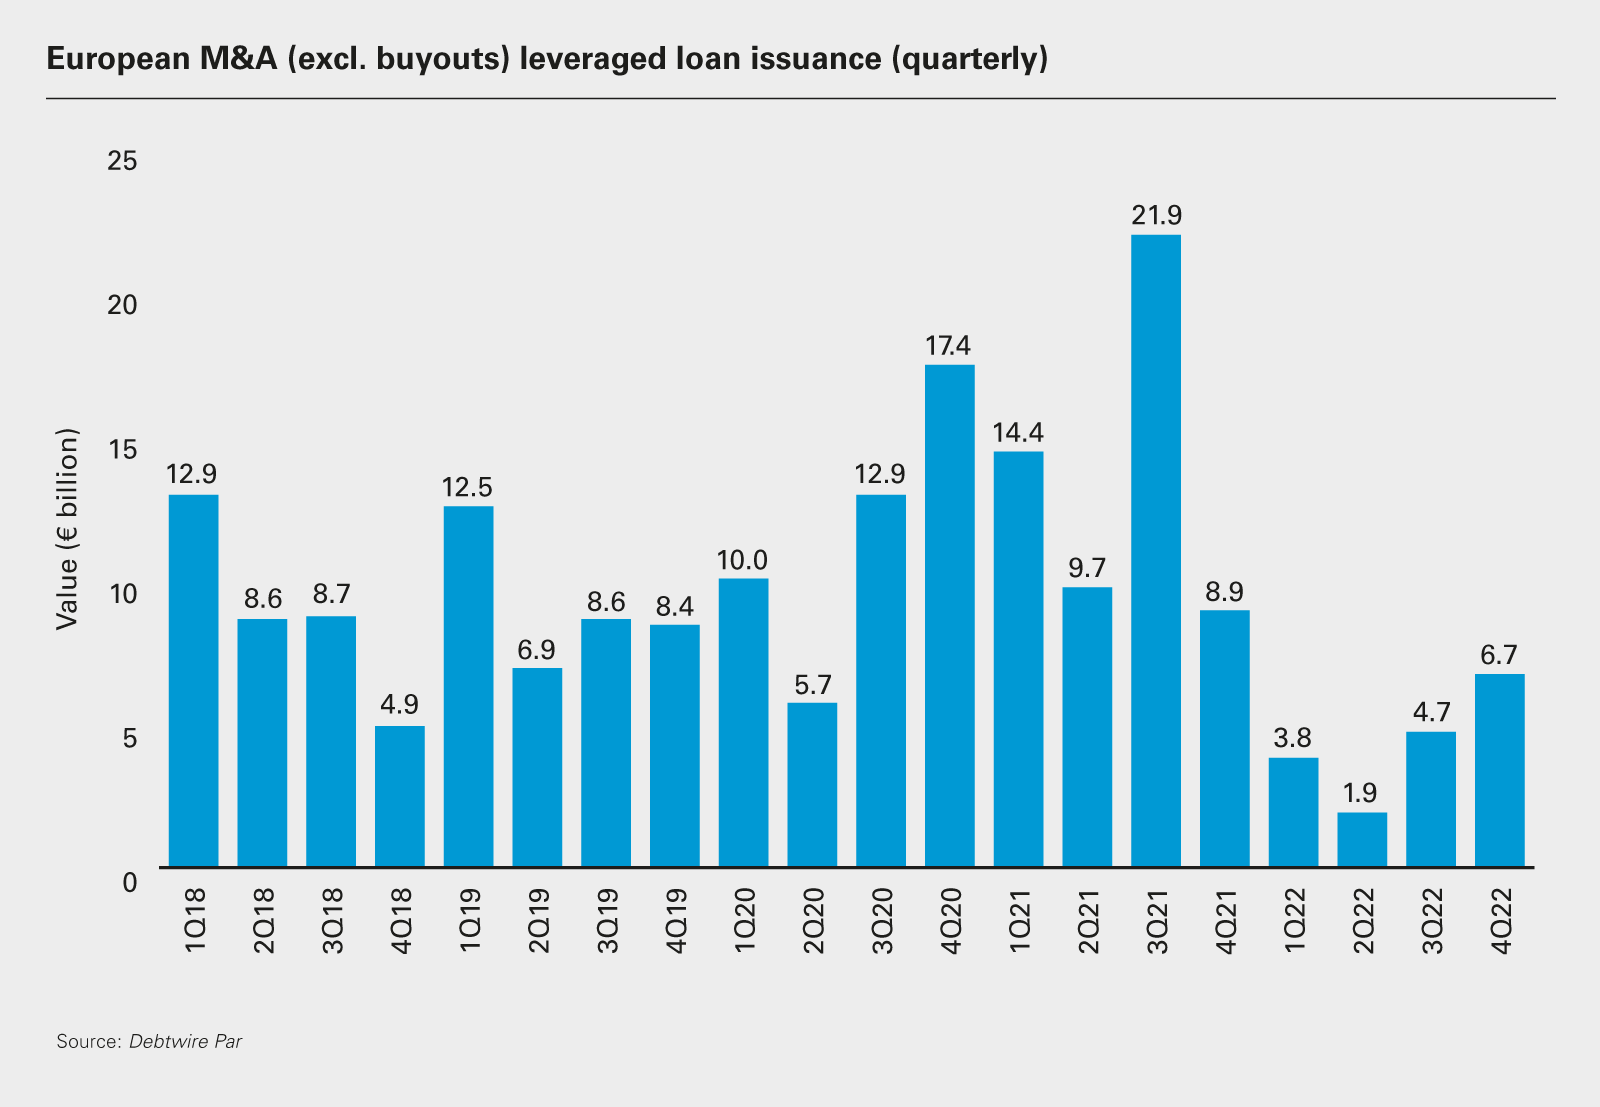 European M&A (excl. buyouts) leveraged loan issuance (quarterly)